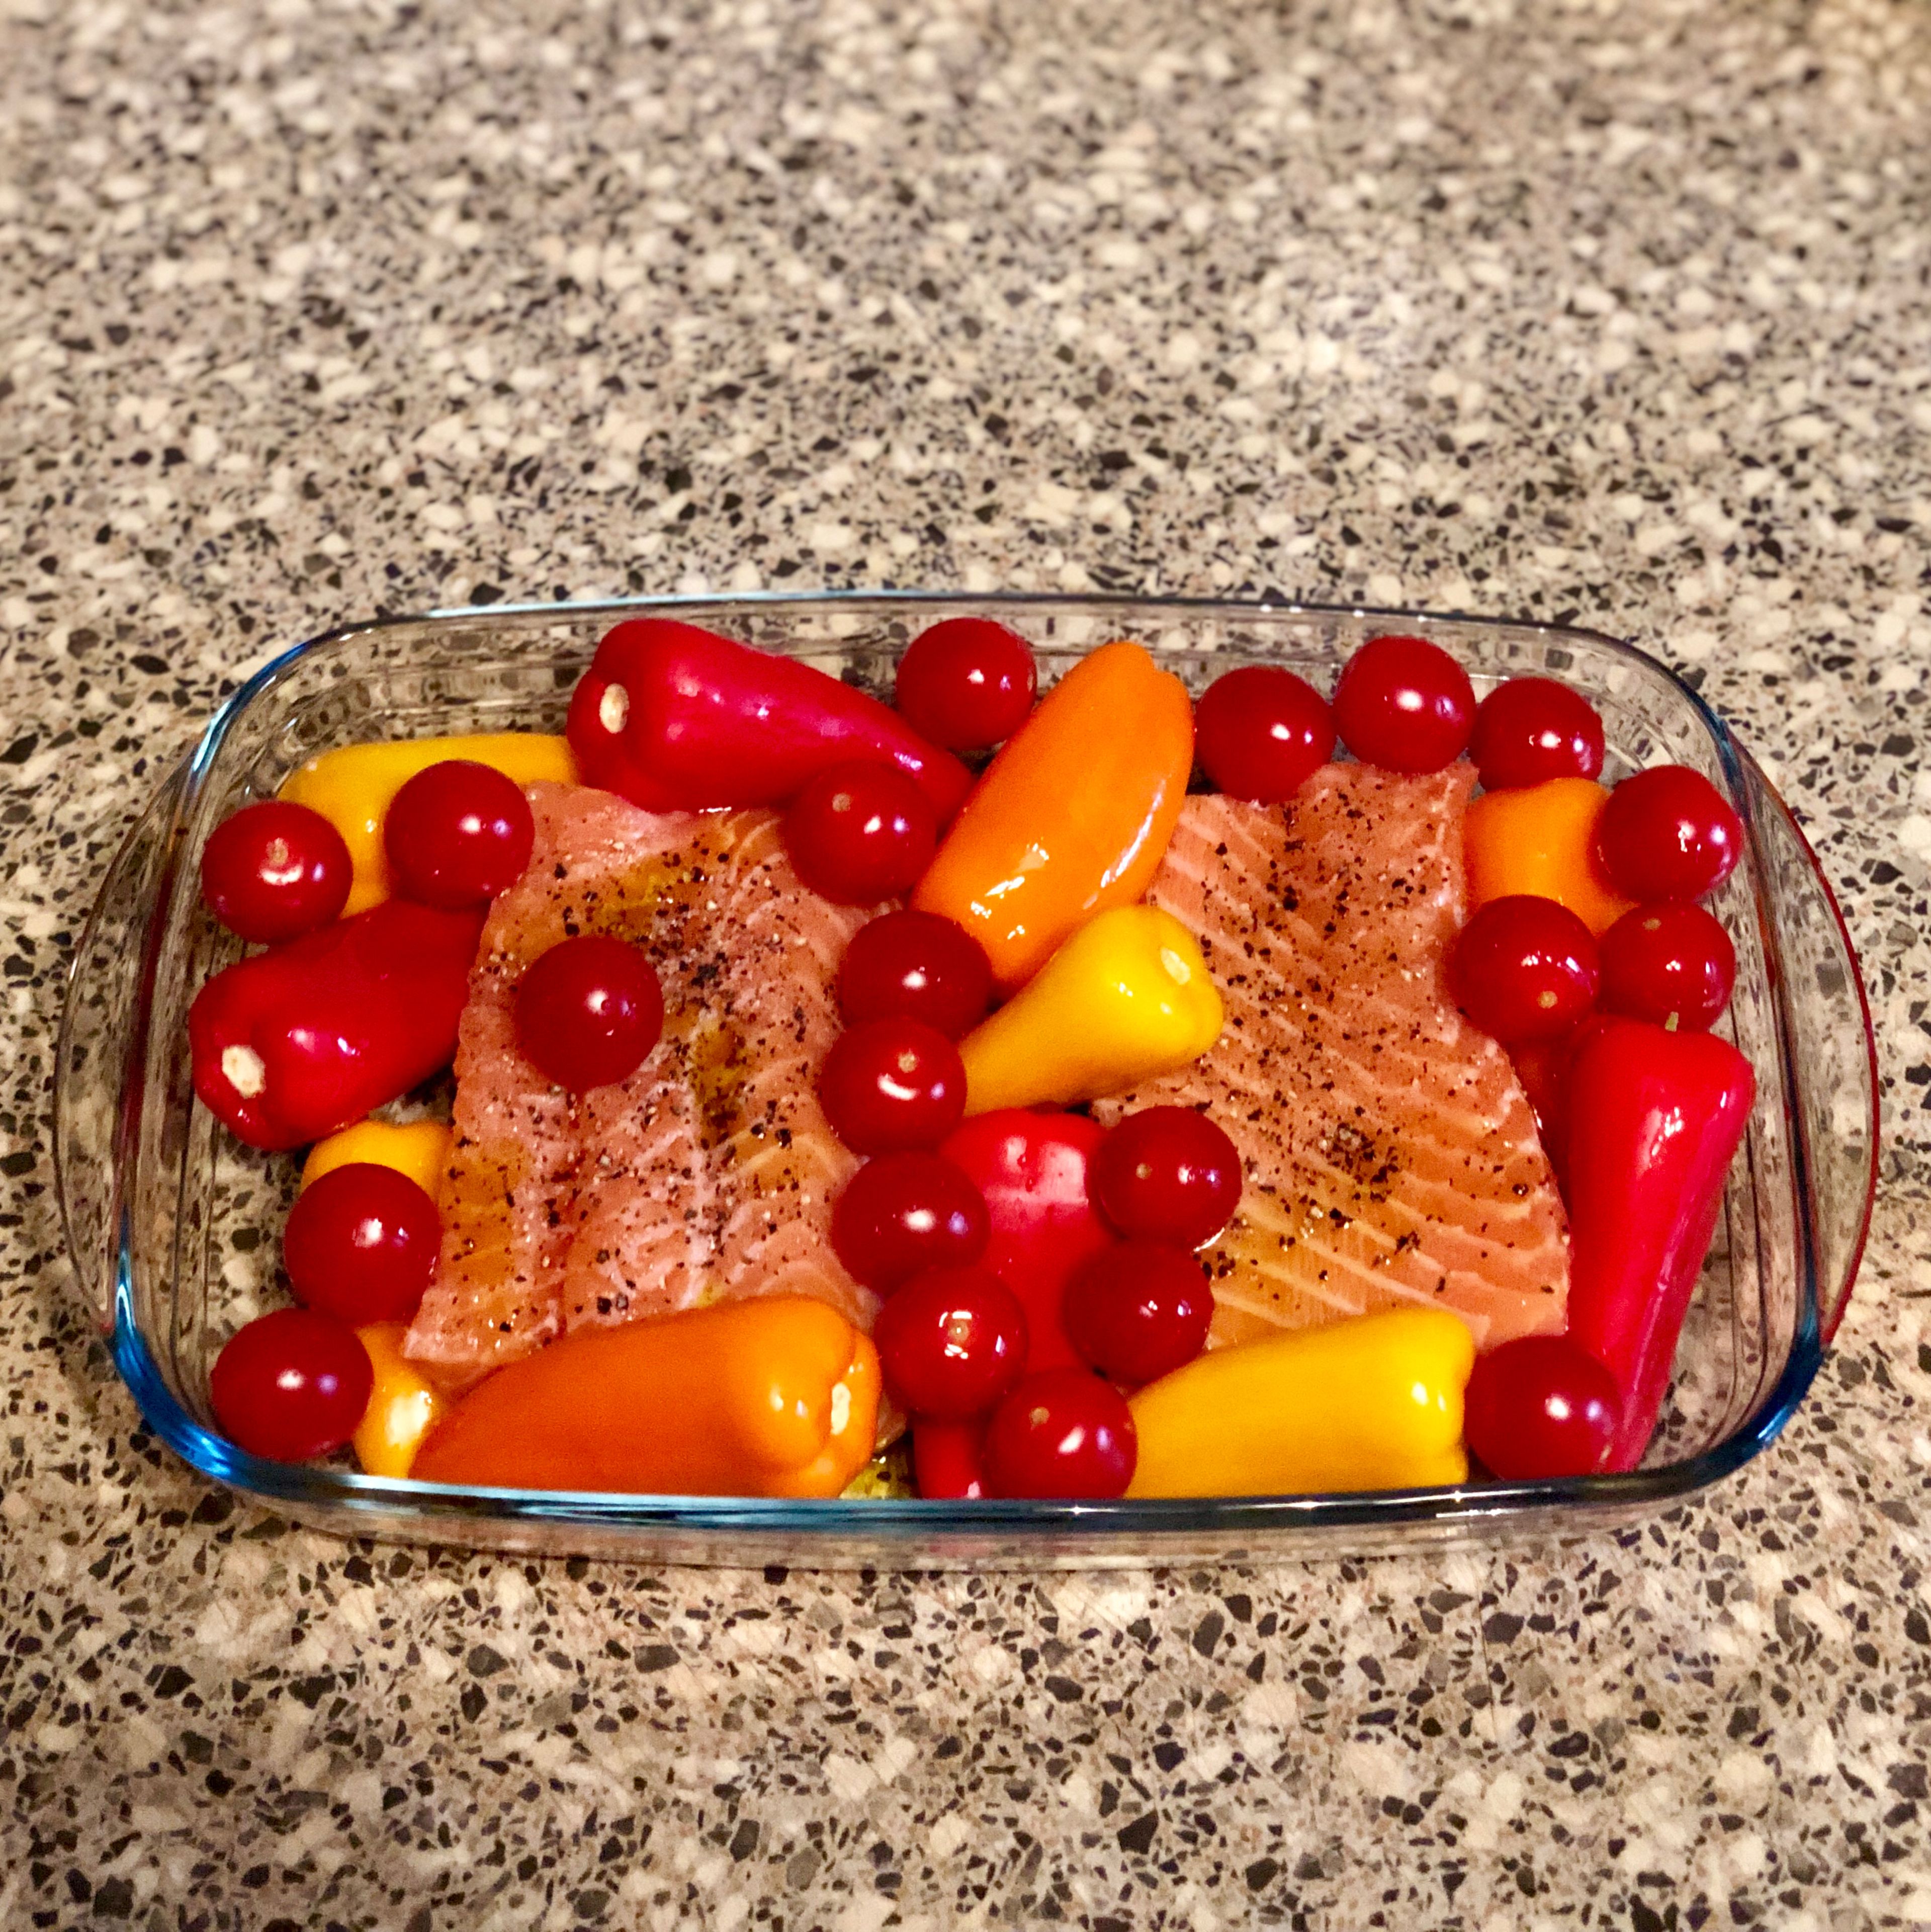 Place salmon, bell peppers and cherry tomatoes in a glass bakeware (baking dish).